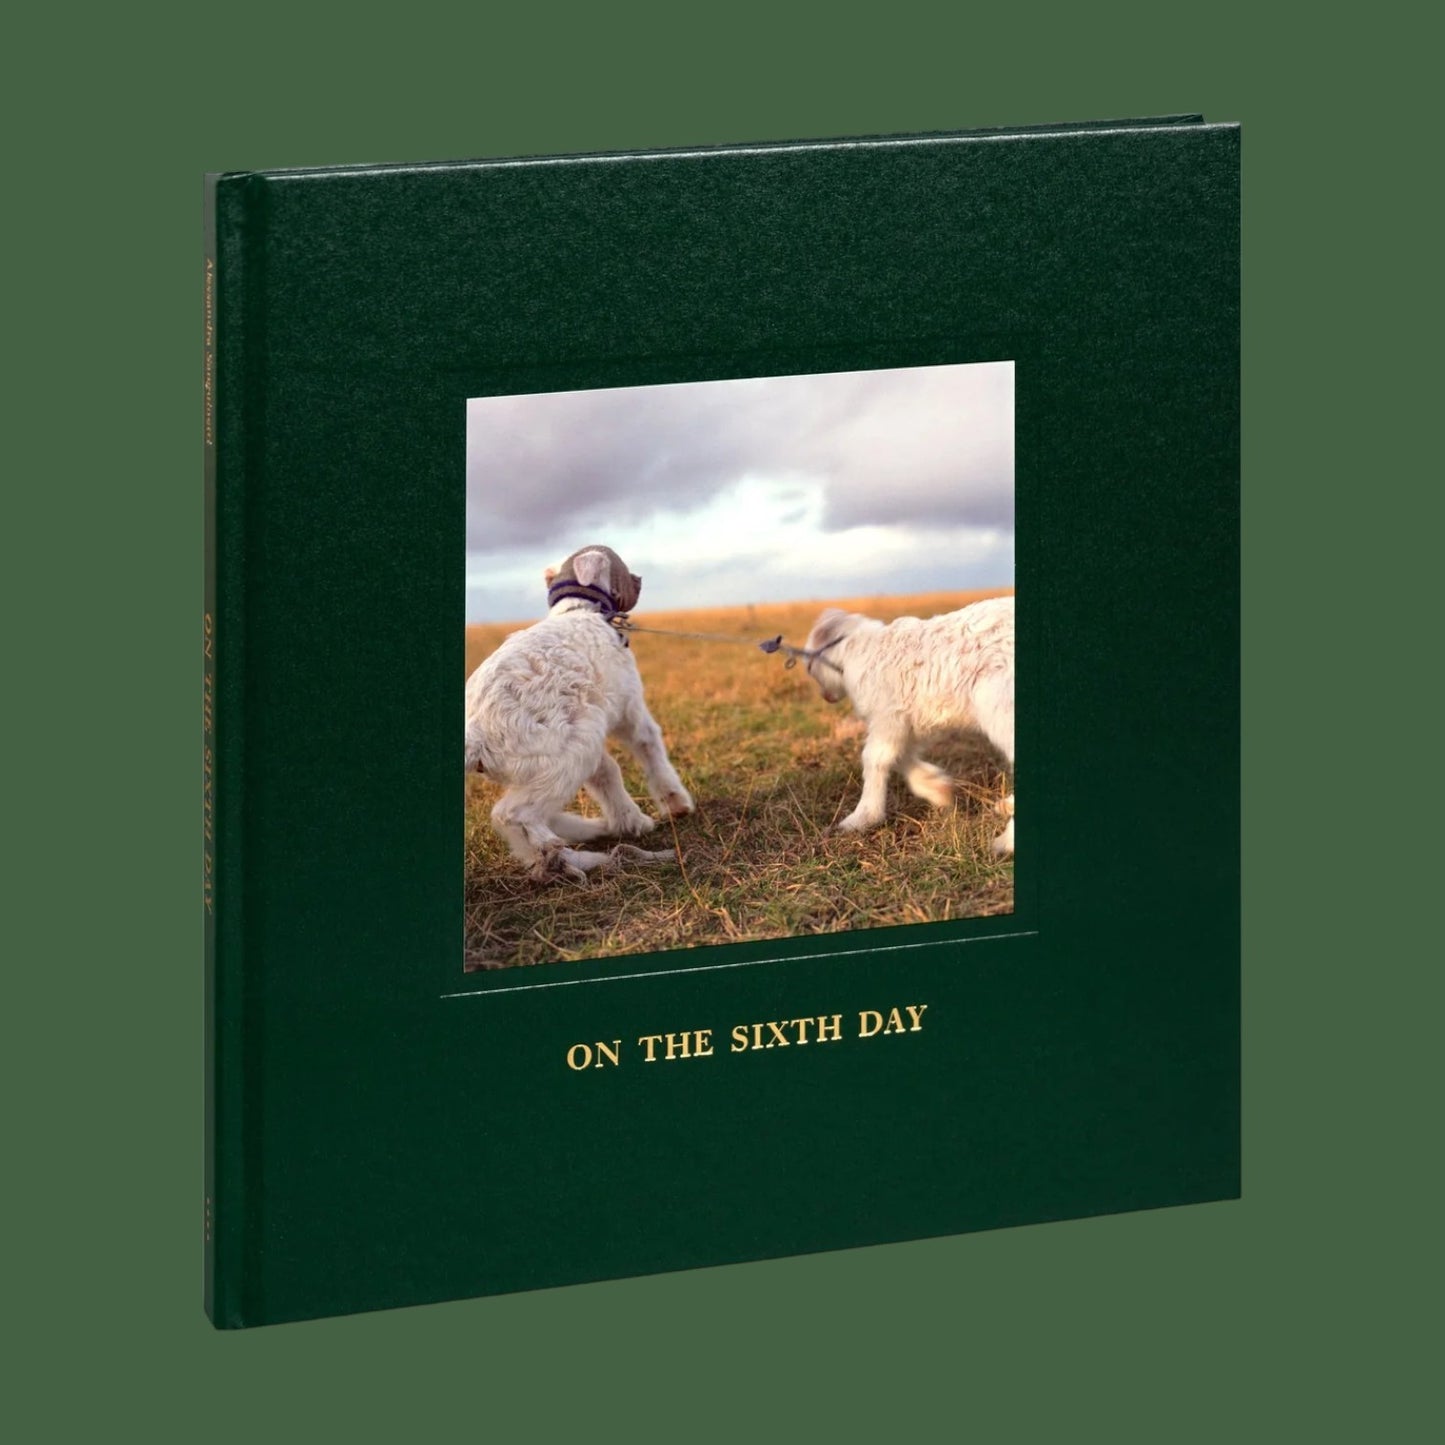 On the Sixth Day by Alessandra Sanguinetti - Olio Music & Arts